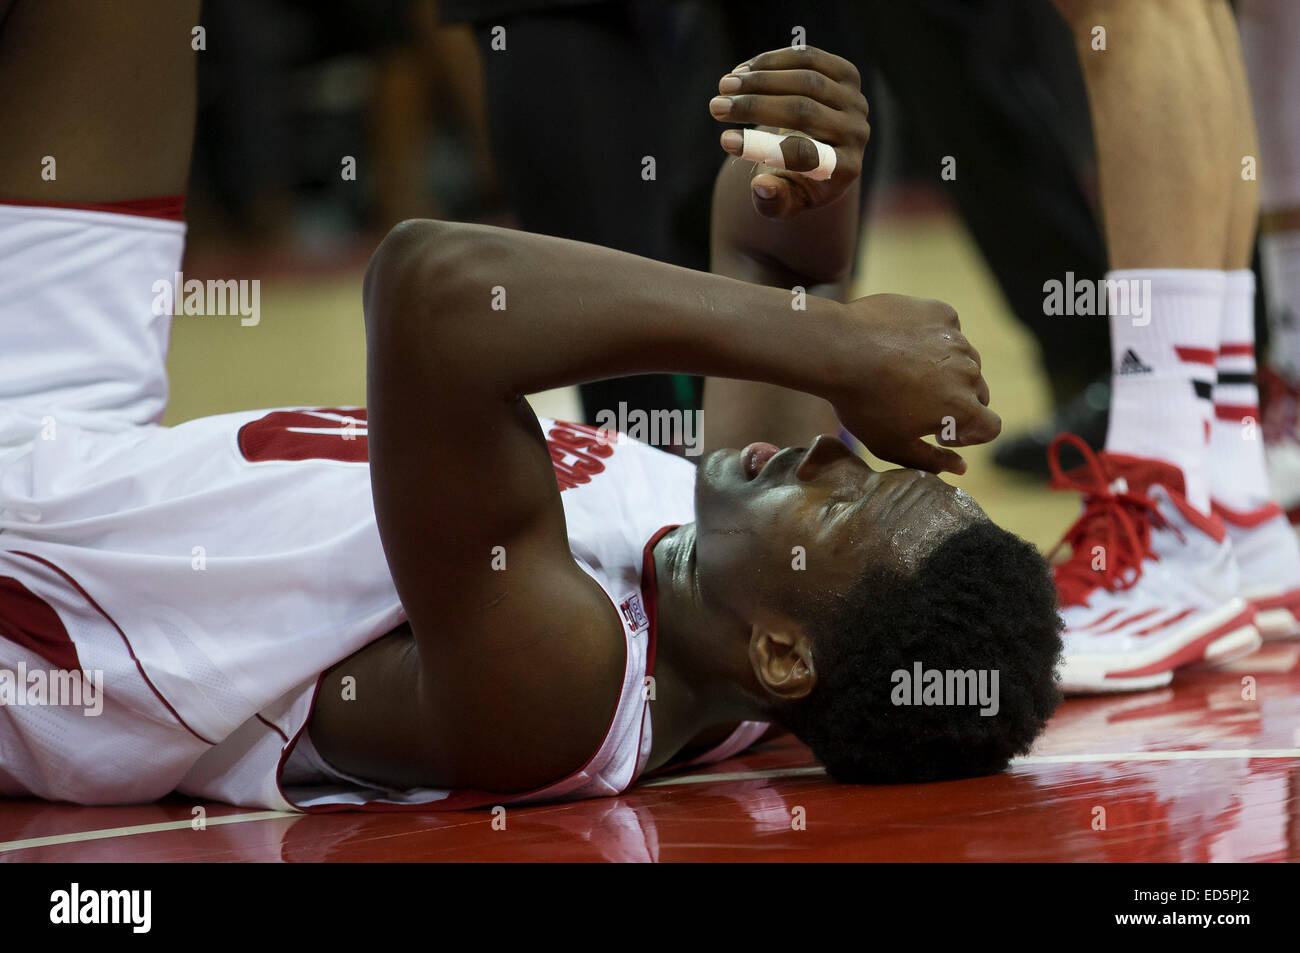 December 28, 2014: Wisconsin Badgers forward Nigel Hayes (10) falls to the floor after getting hit in the eye during the NCAA Basketball game between the Wisconsin Badgers and the Buffalo Bulls at the Kohl Center in Madison, WI. Wisconsin defeated Buffalo 68-56. John Fisher/CSM Stock Photo